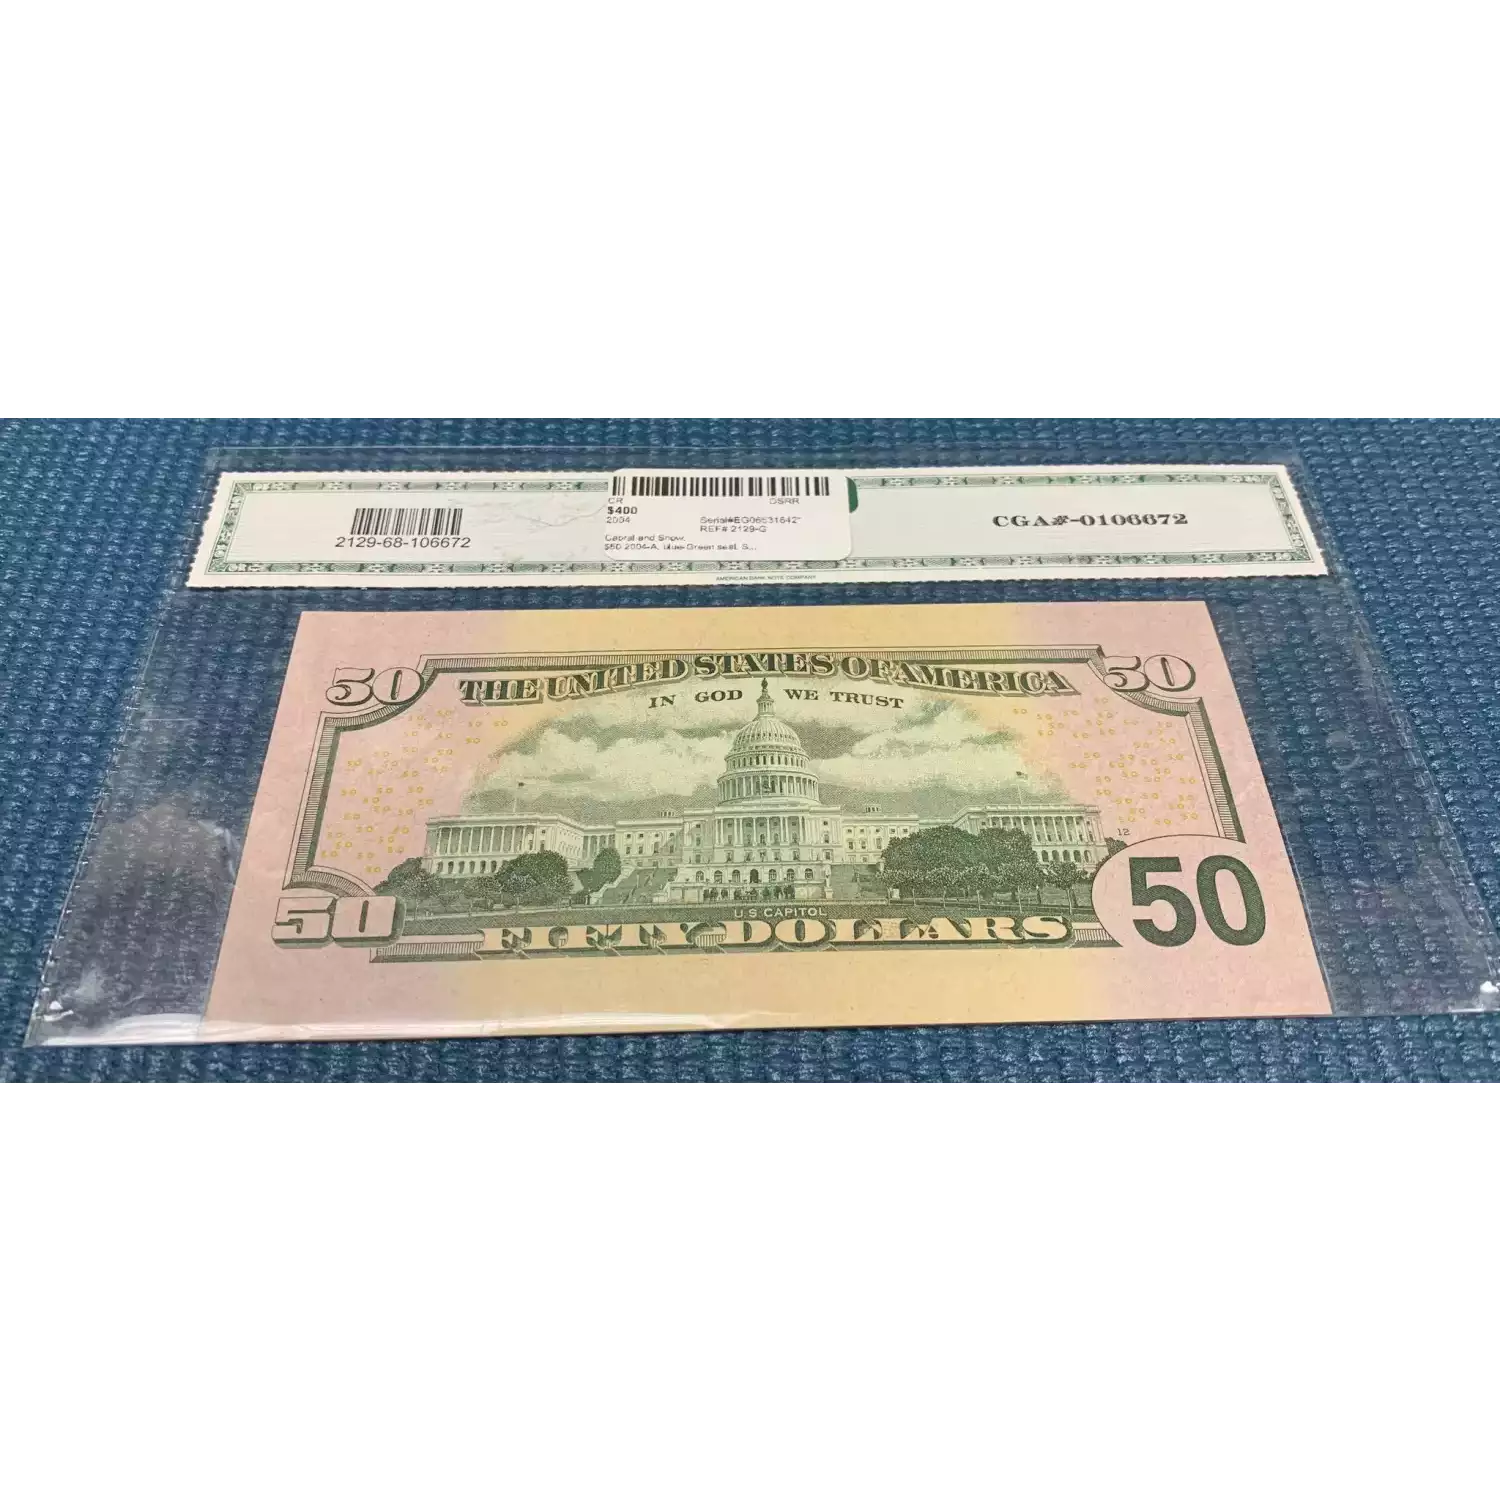 $50 2004-A. blue-Green seal. Small Size $50 Federal Reserve Notes 2129-G